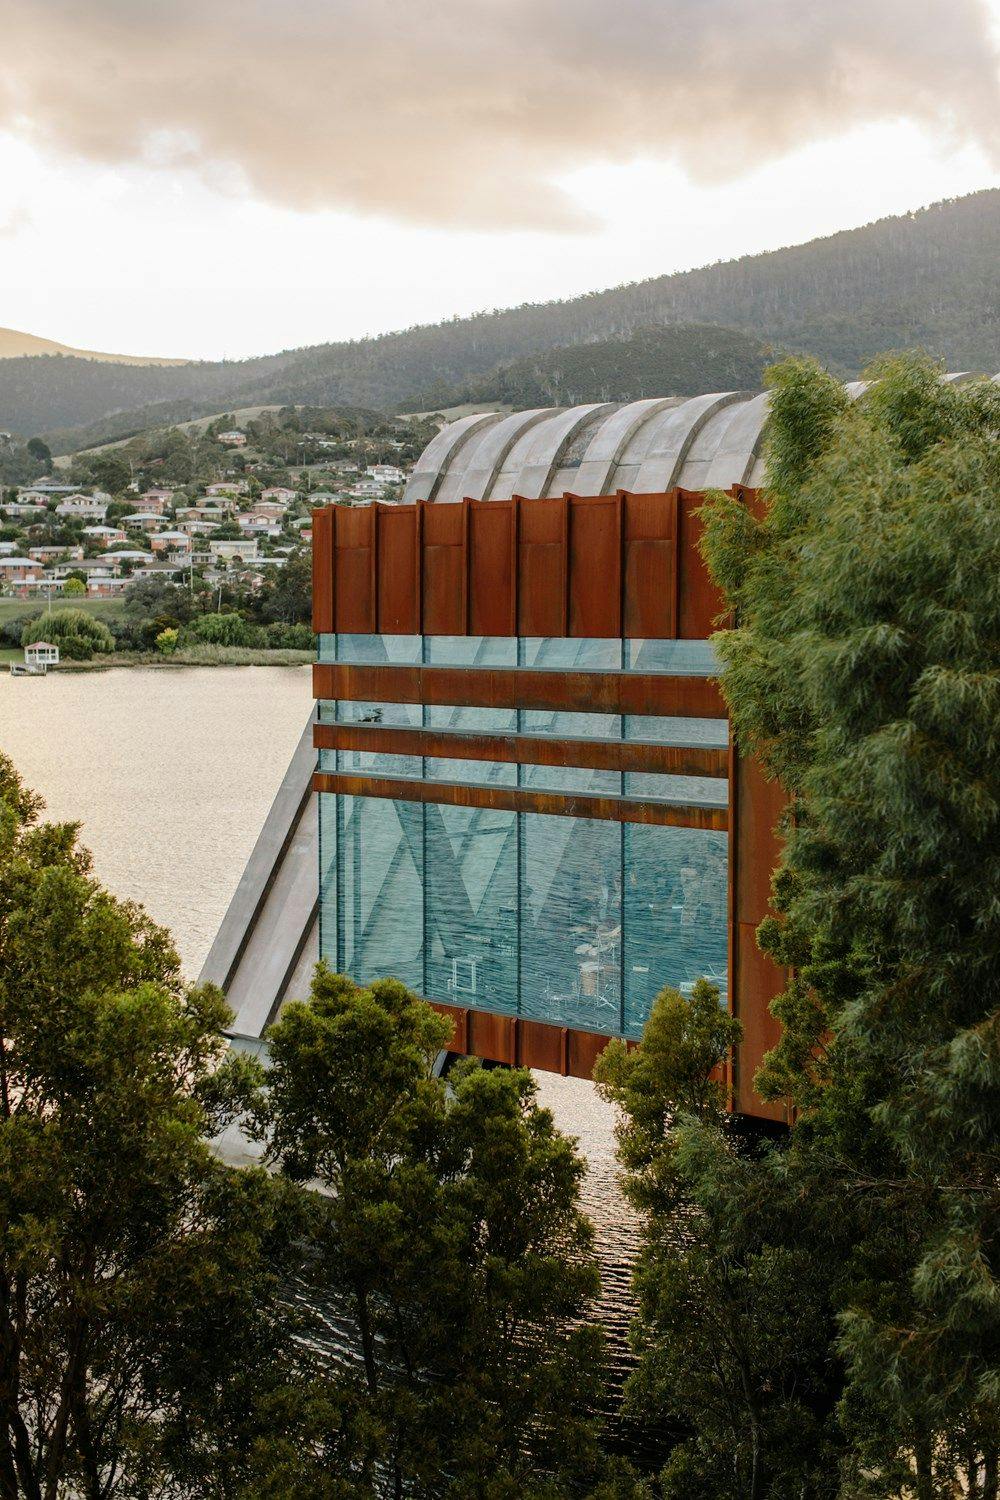 Side profile of Pharos with glass, concrete and corten steel.